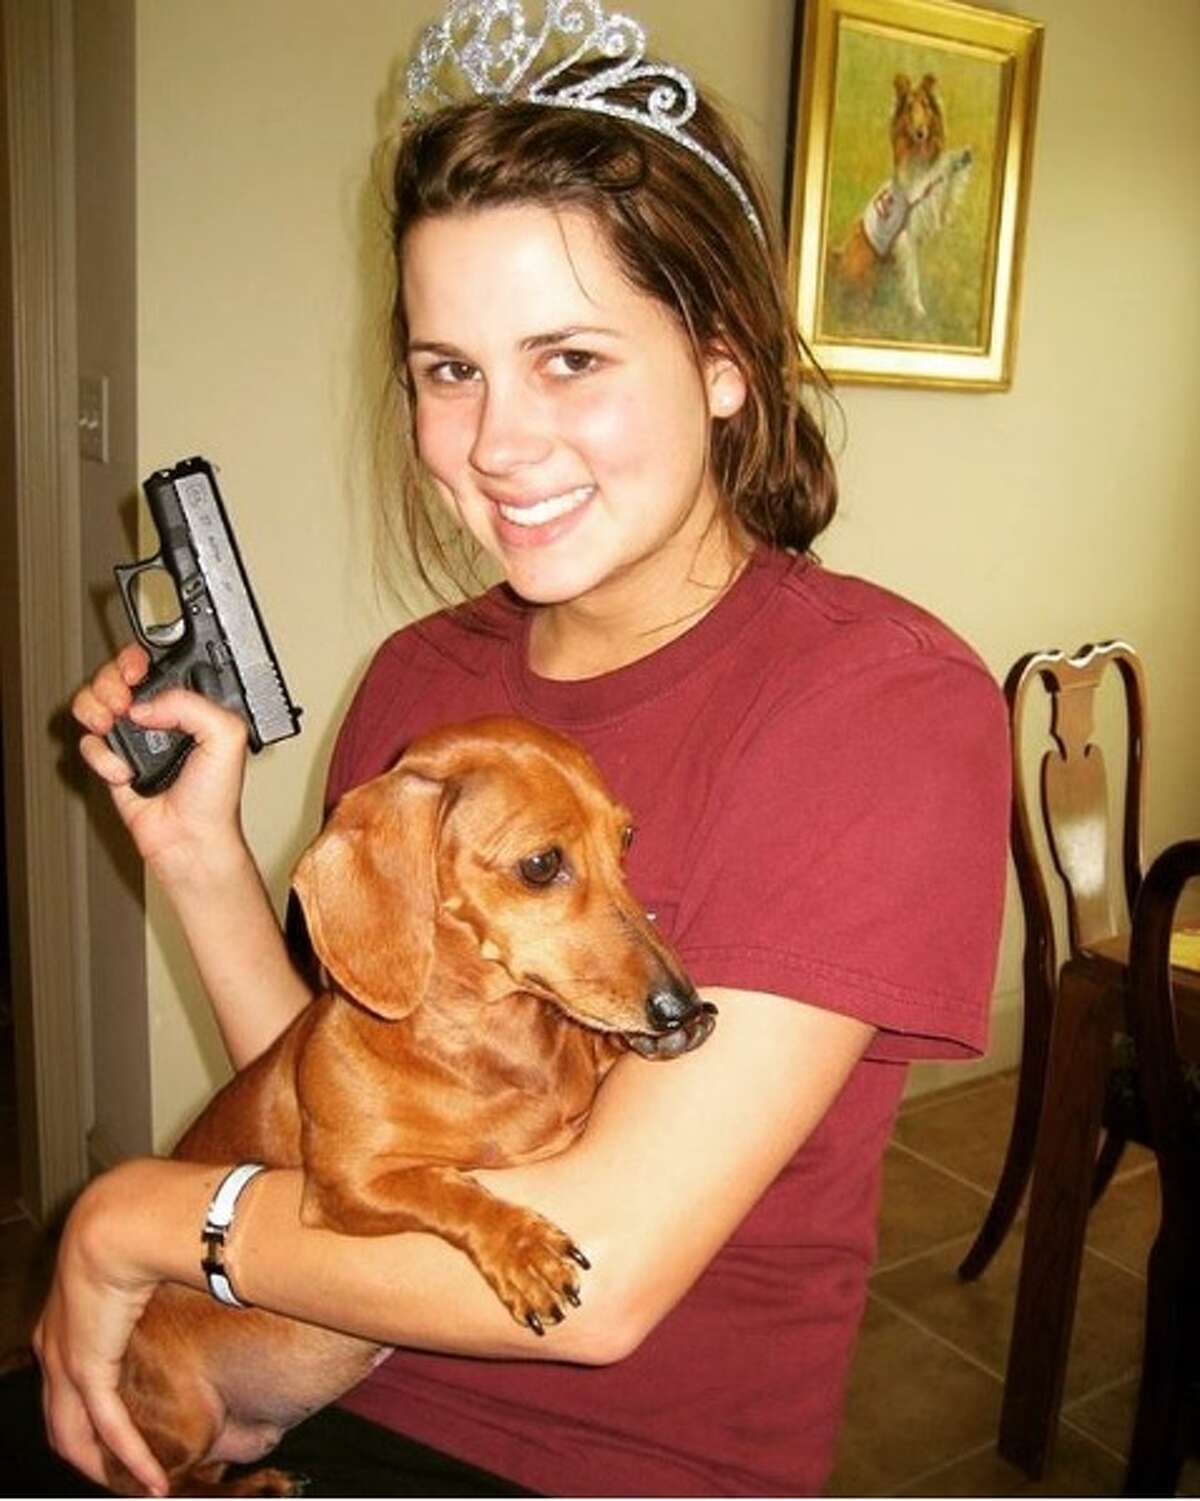 @governorperry: "21st birthday .....9 years ago with her Glock and her Lucy!! Happy Birthday Sydney"